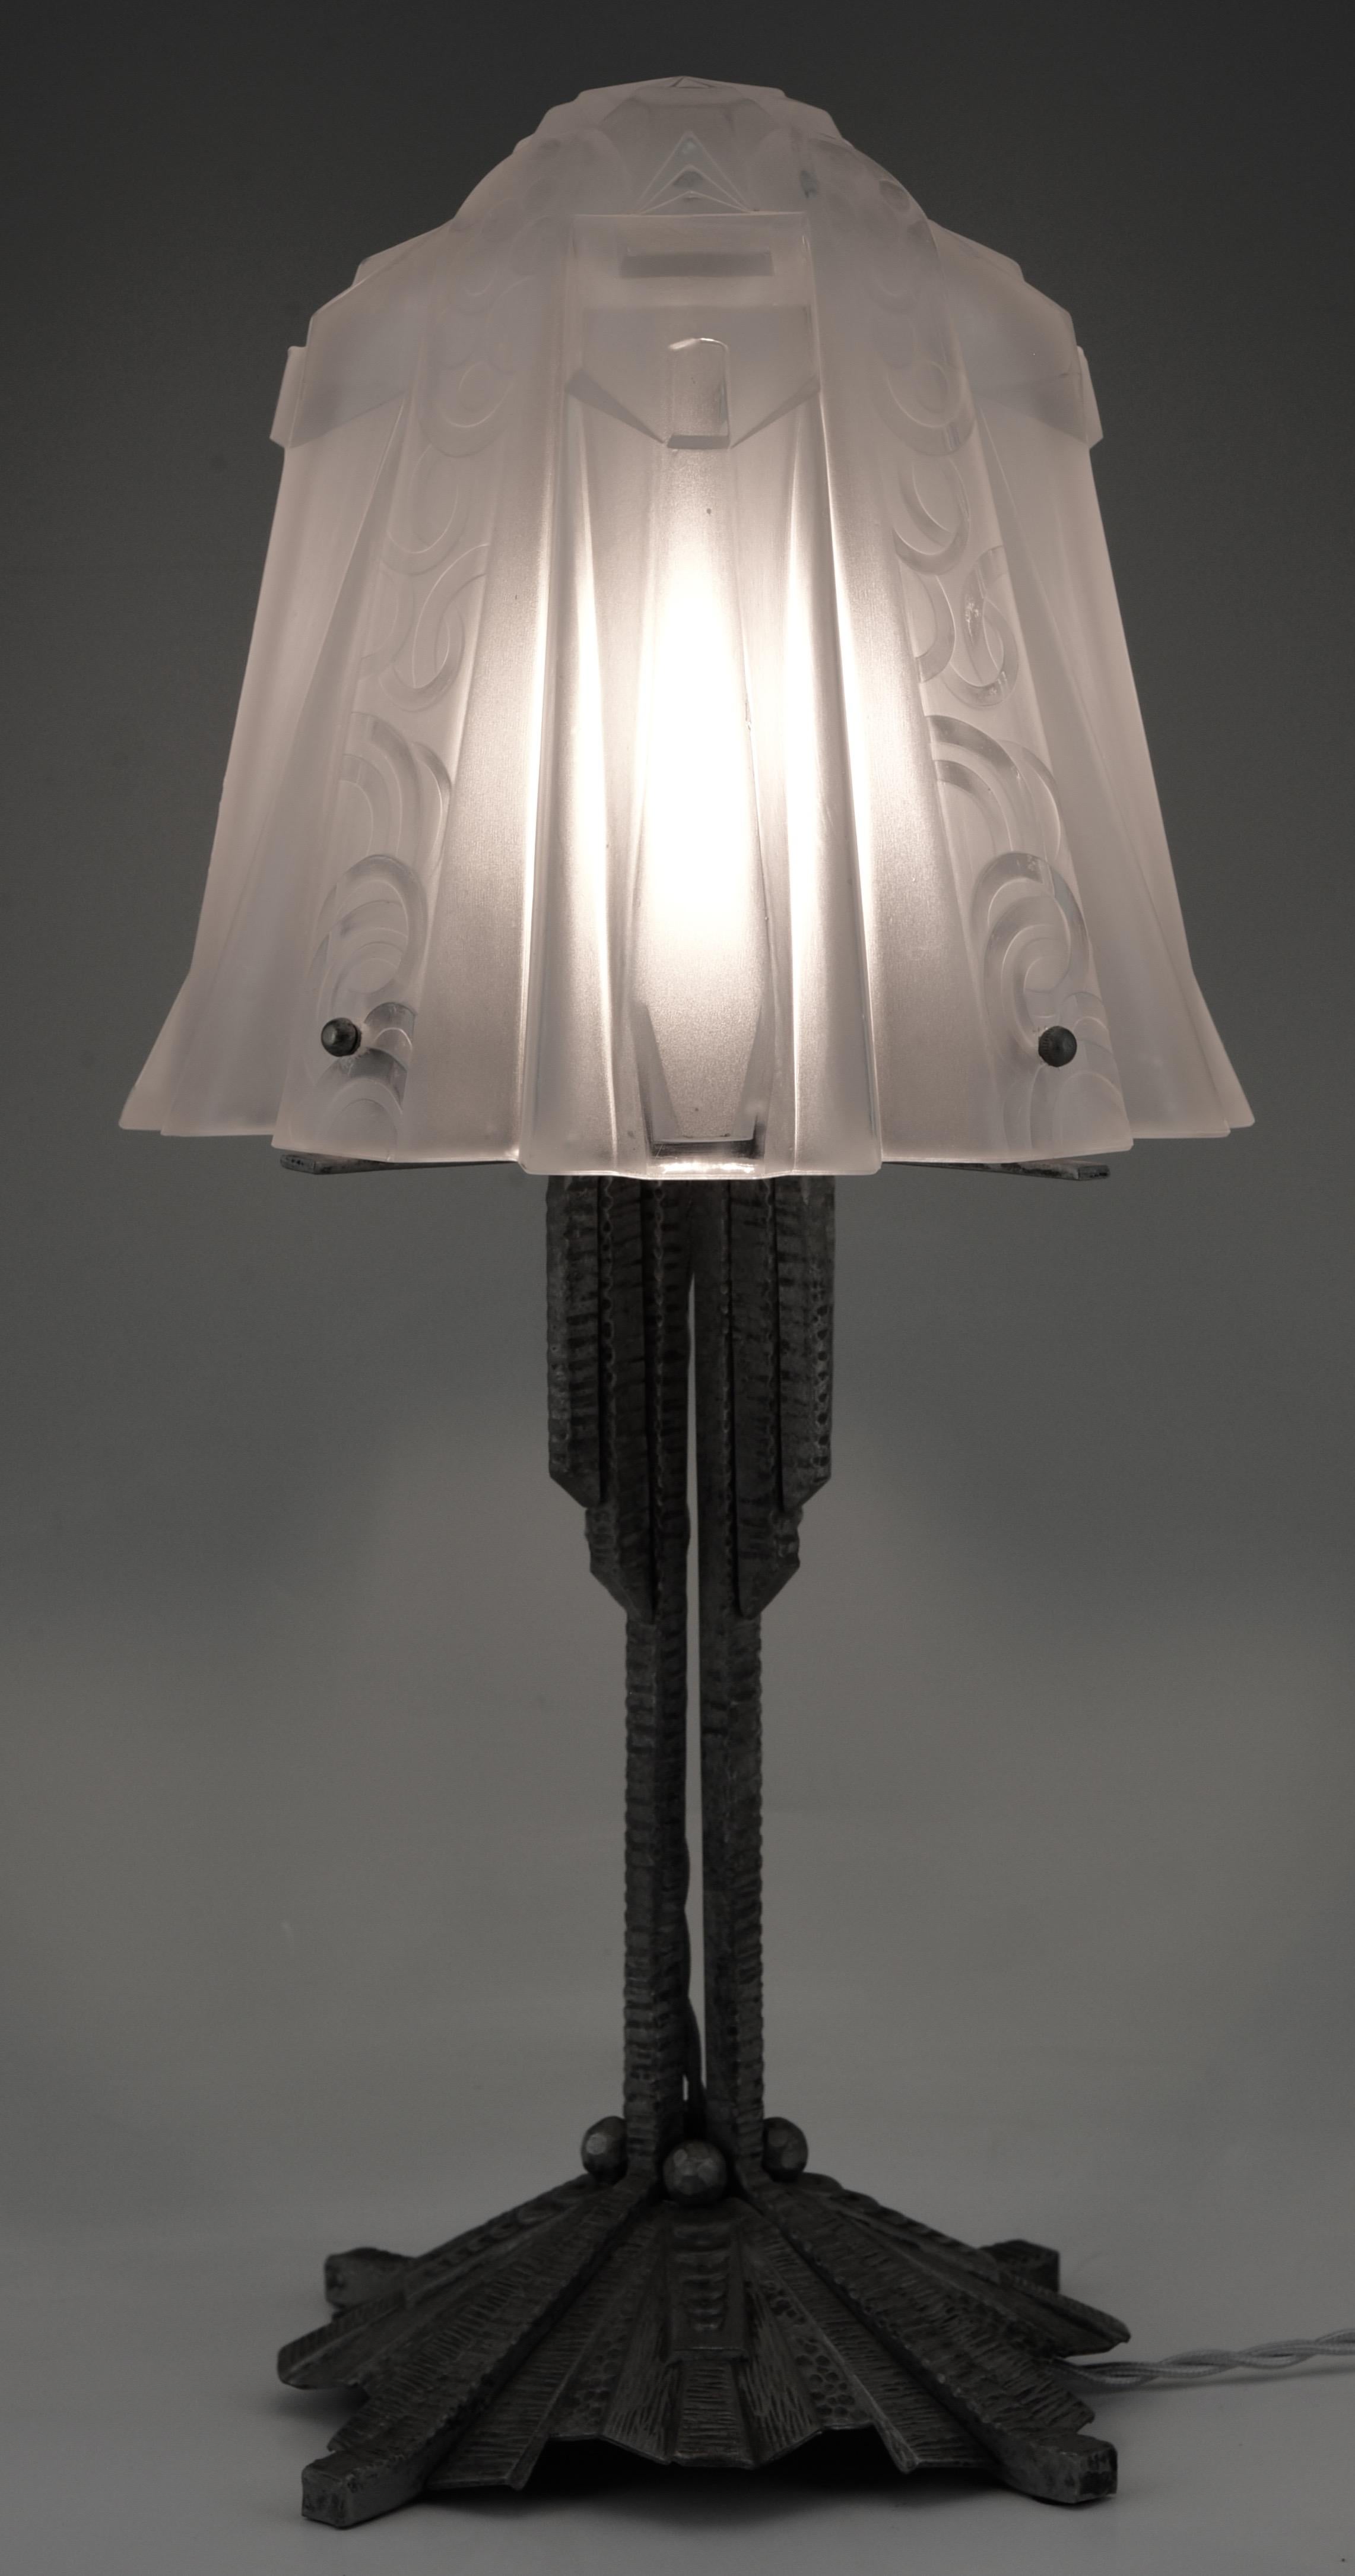 Art Deco Glass and Iron Table Lamp Muller Freres, France, 1925 (Art déco)